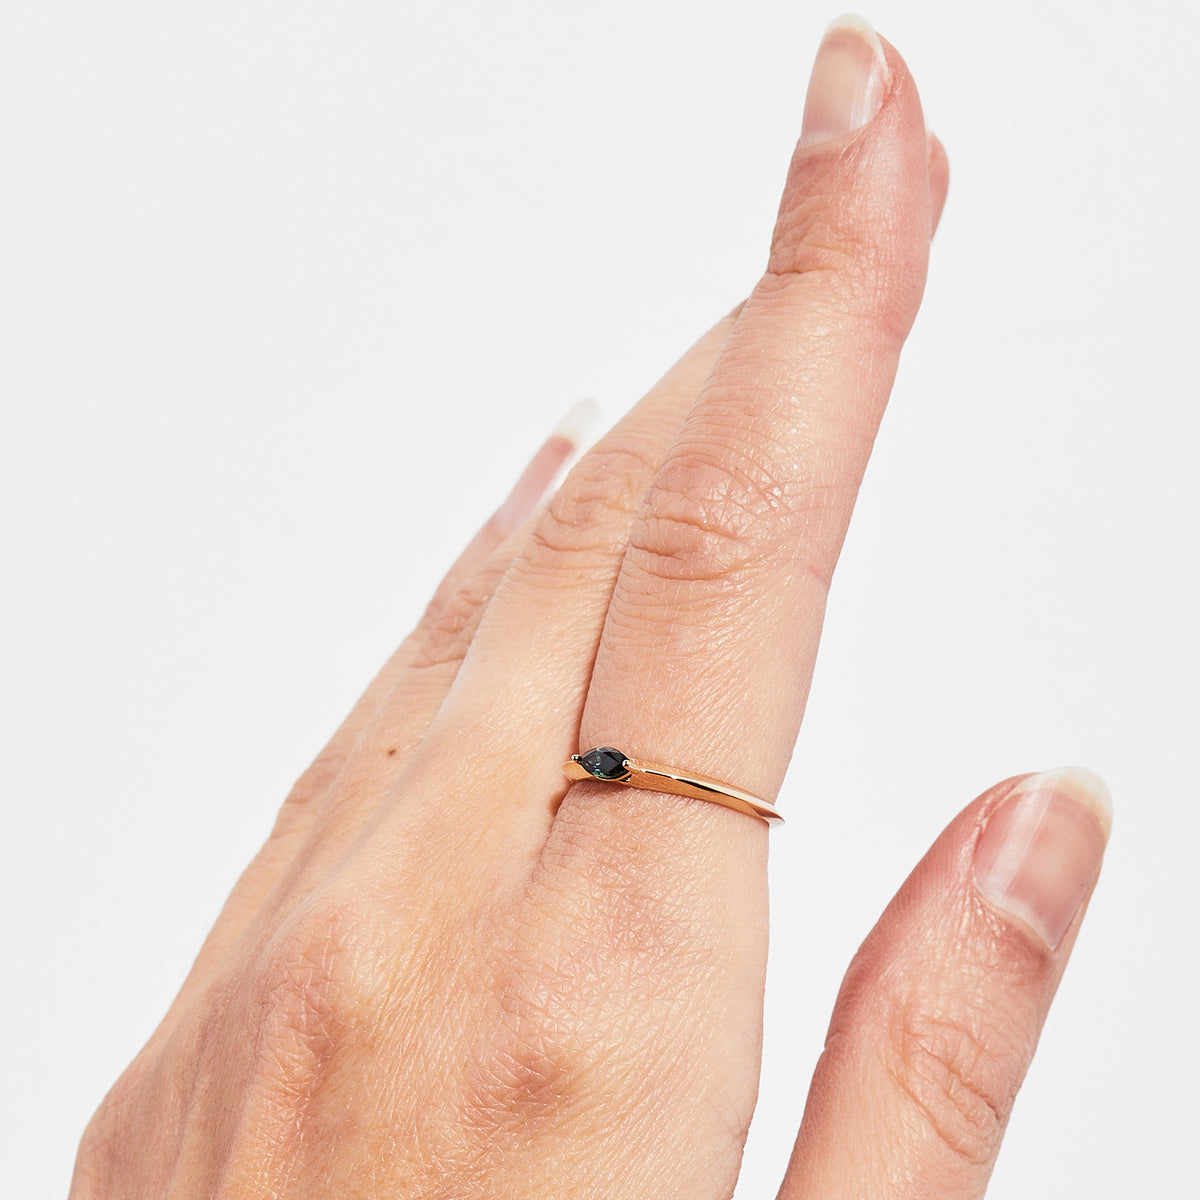 A hand wearing a ring, displaying how the thin 14K yellow gold band and a green Australian Sapphire.